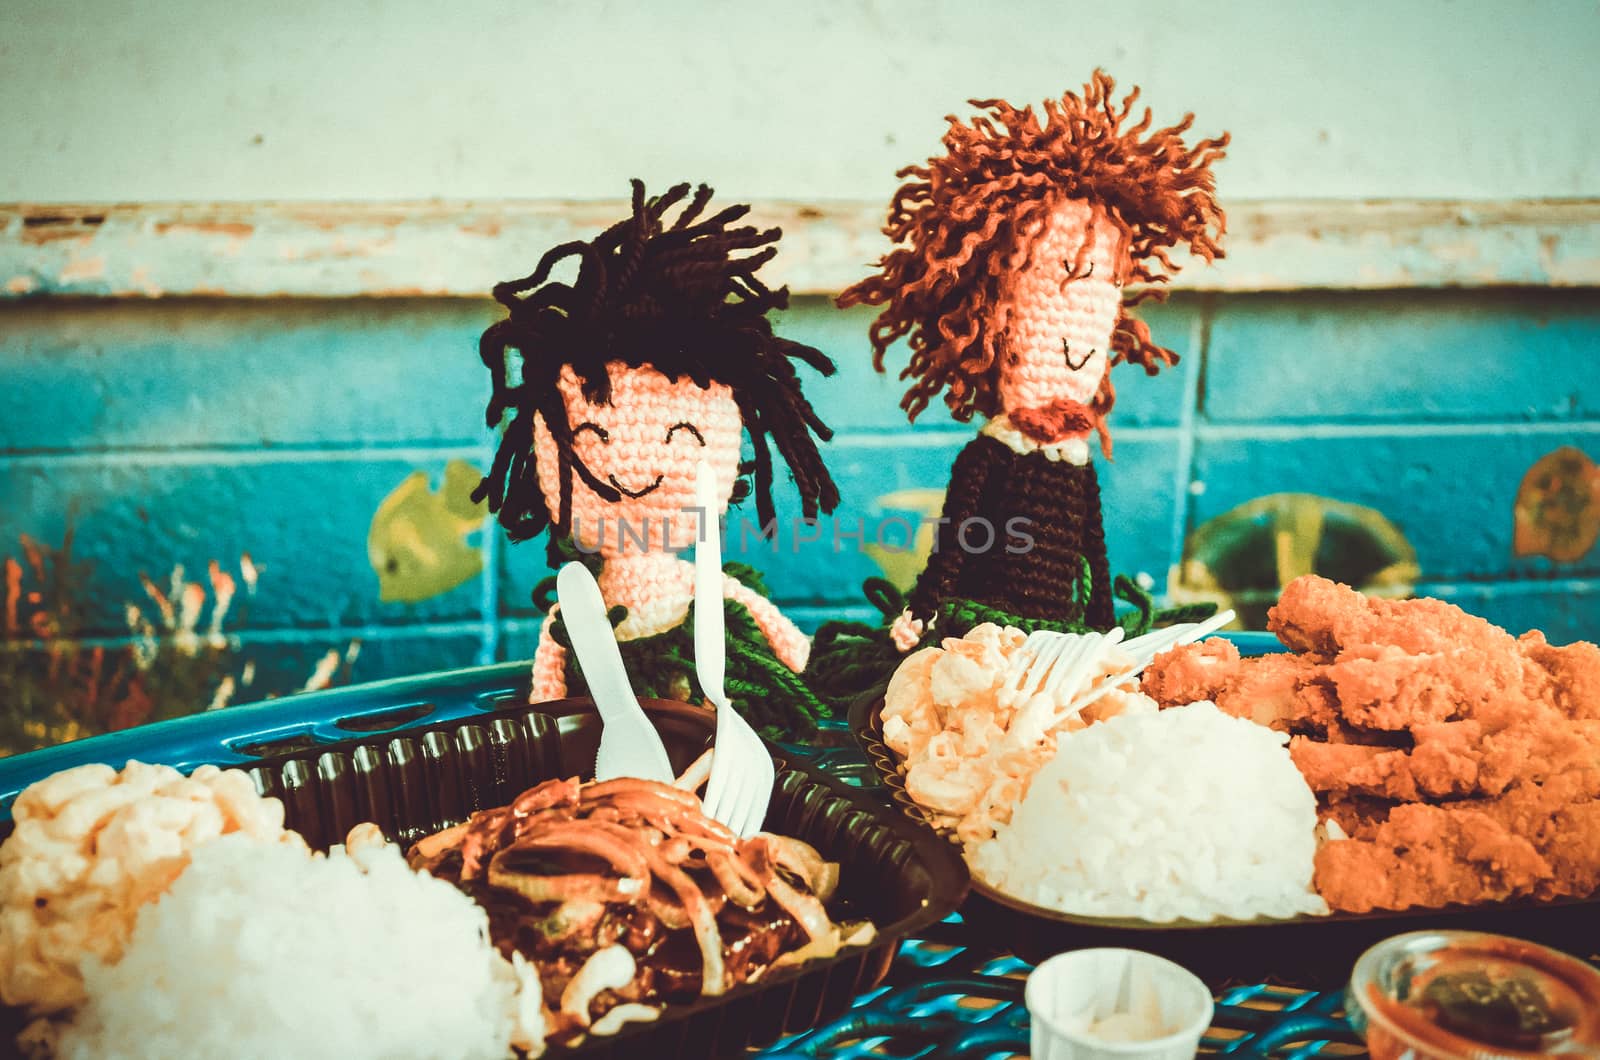 Bride and groom wool puppets having lunch in Hawaii, US by mikelju